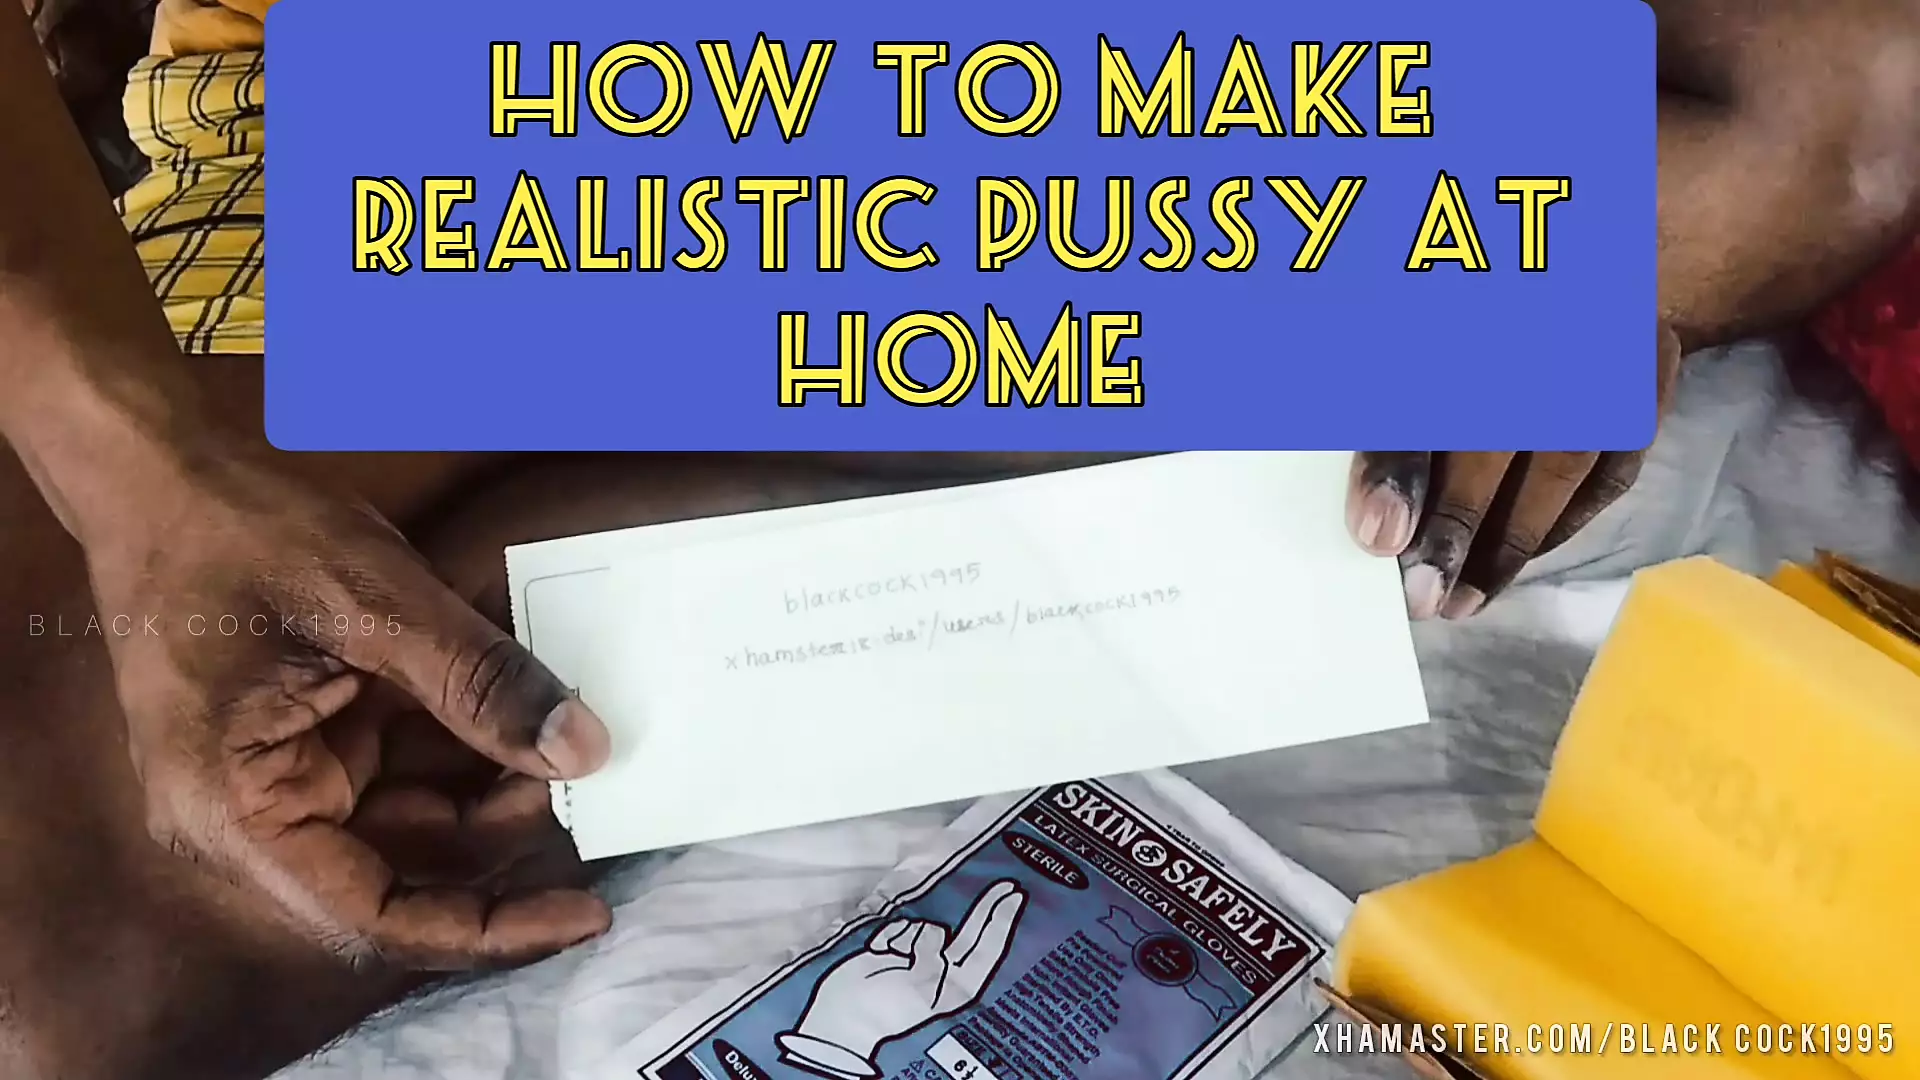 How To Make A Toy Vagina Or Anus At Home And How To Make A Sex Toy At Home By Blackcock1995 picture picture